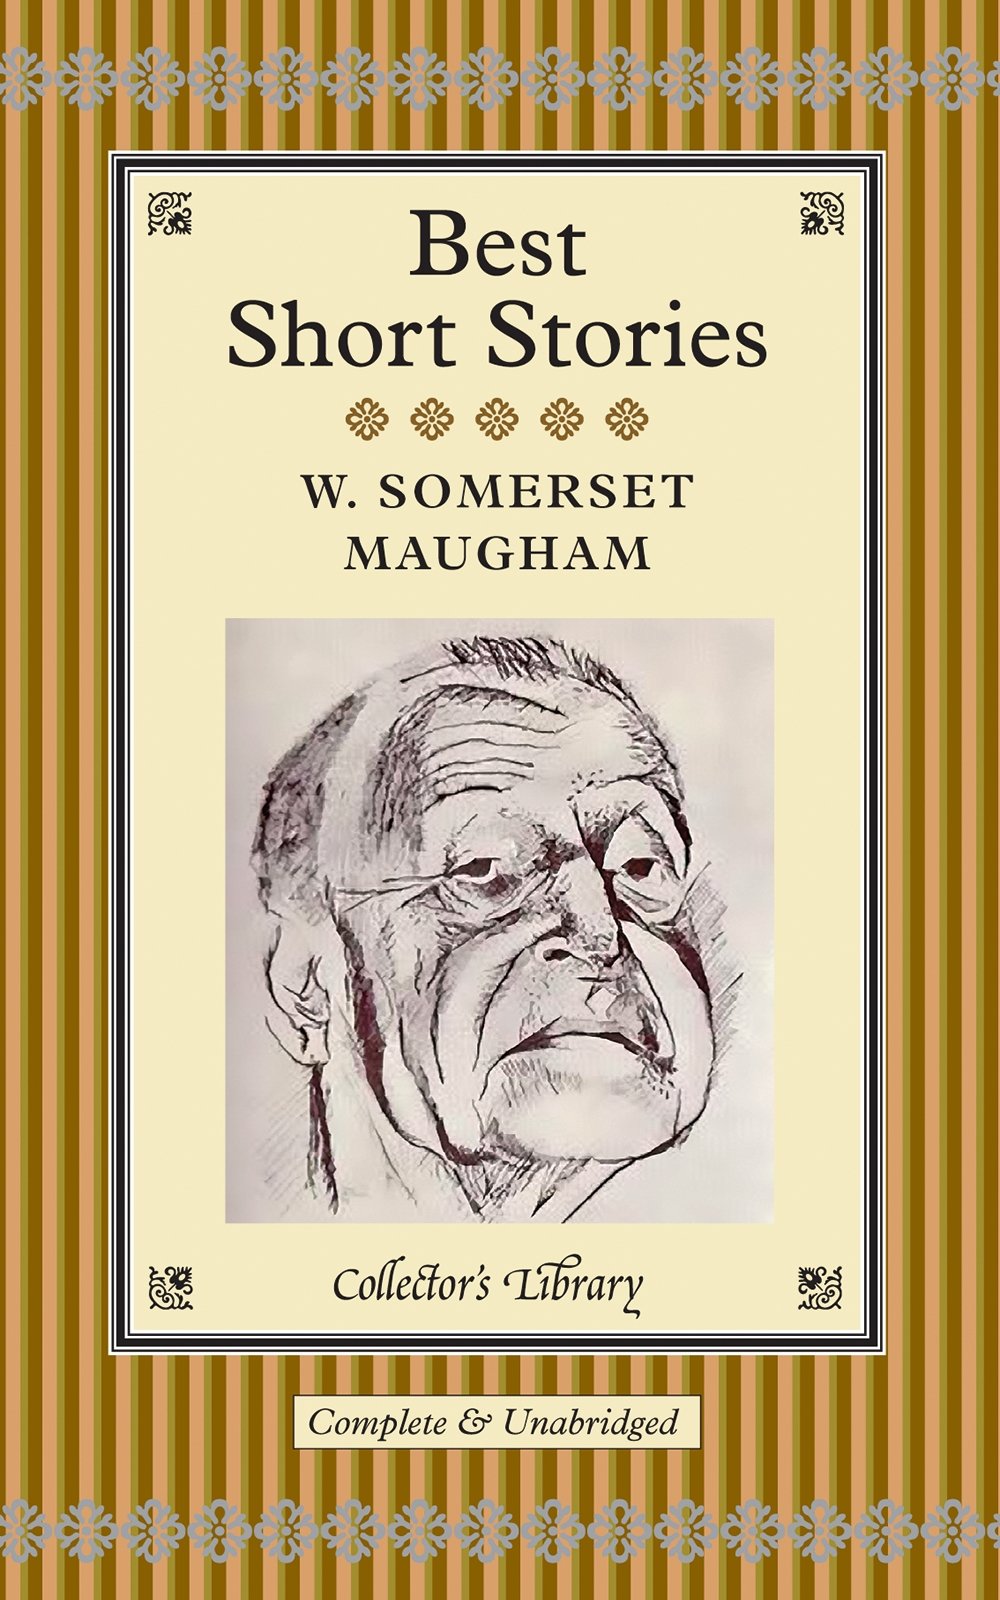 Short stories book. Somerset Maugham stories. Maugham stories книга. Maugham short stories. Somerset Maugham books.